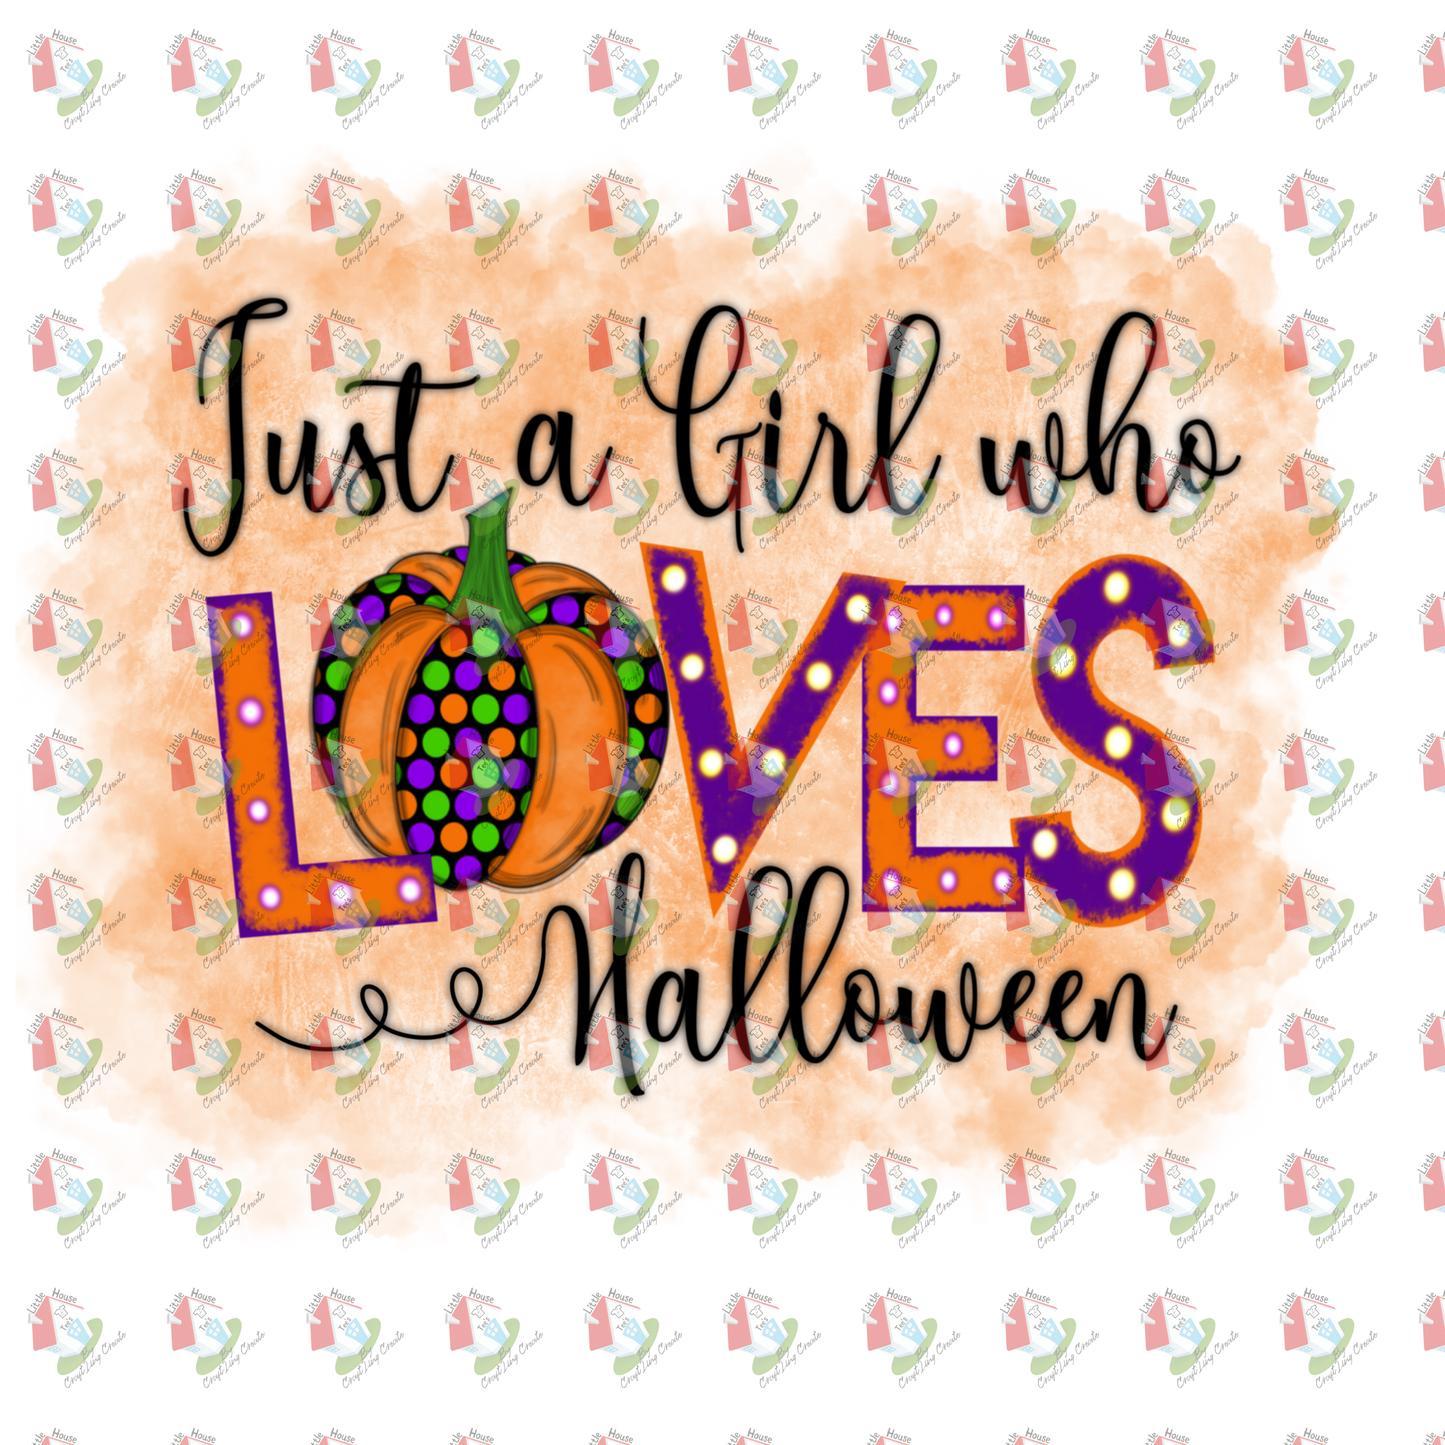 7211 Just a girl who love halloween